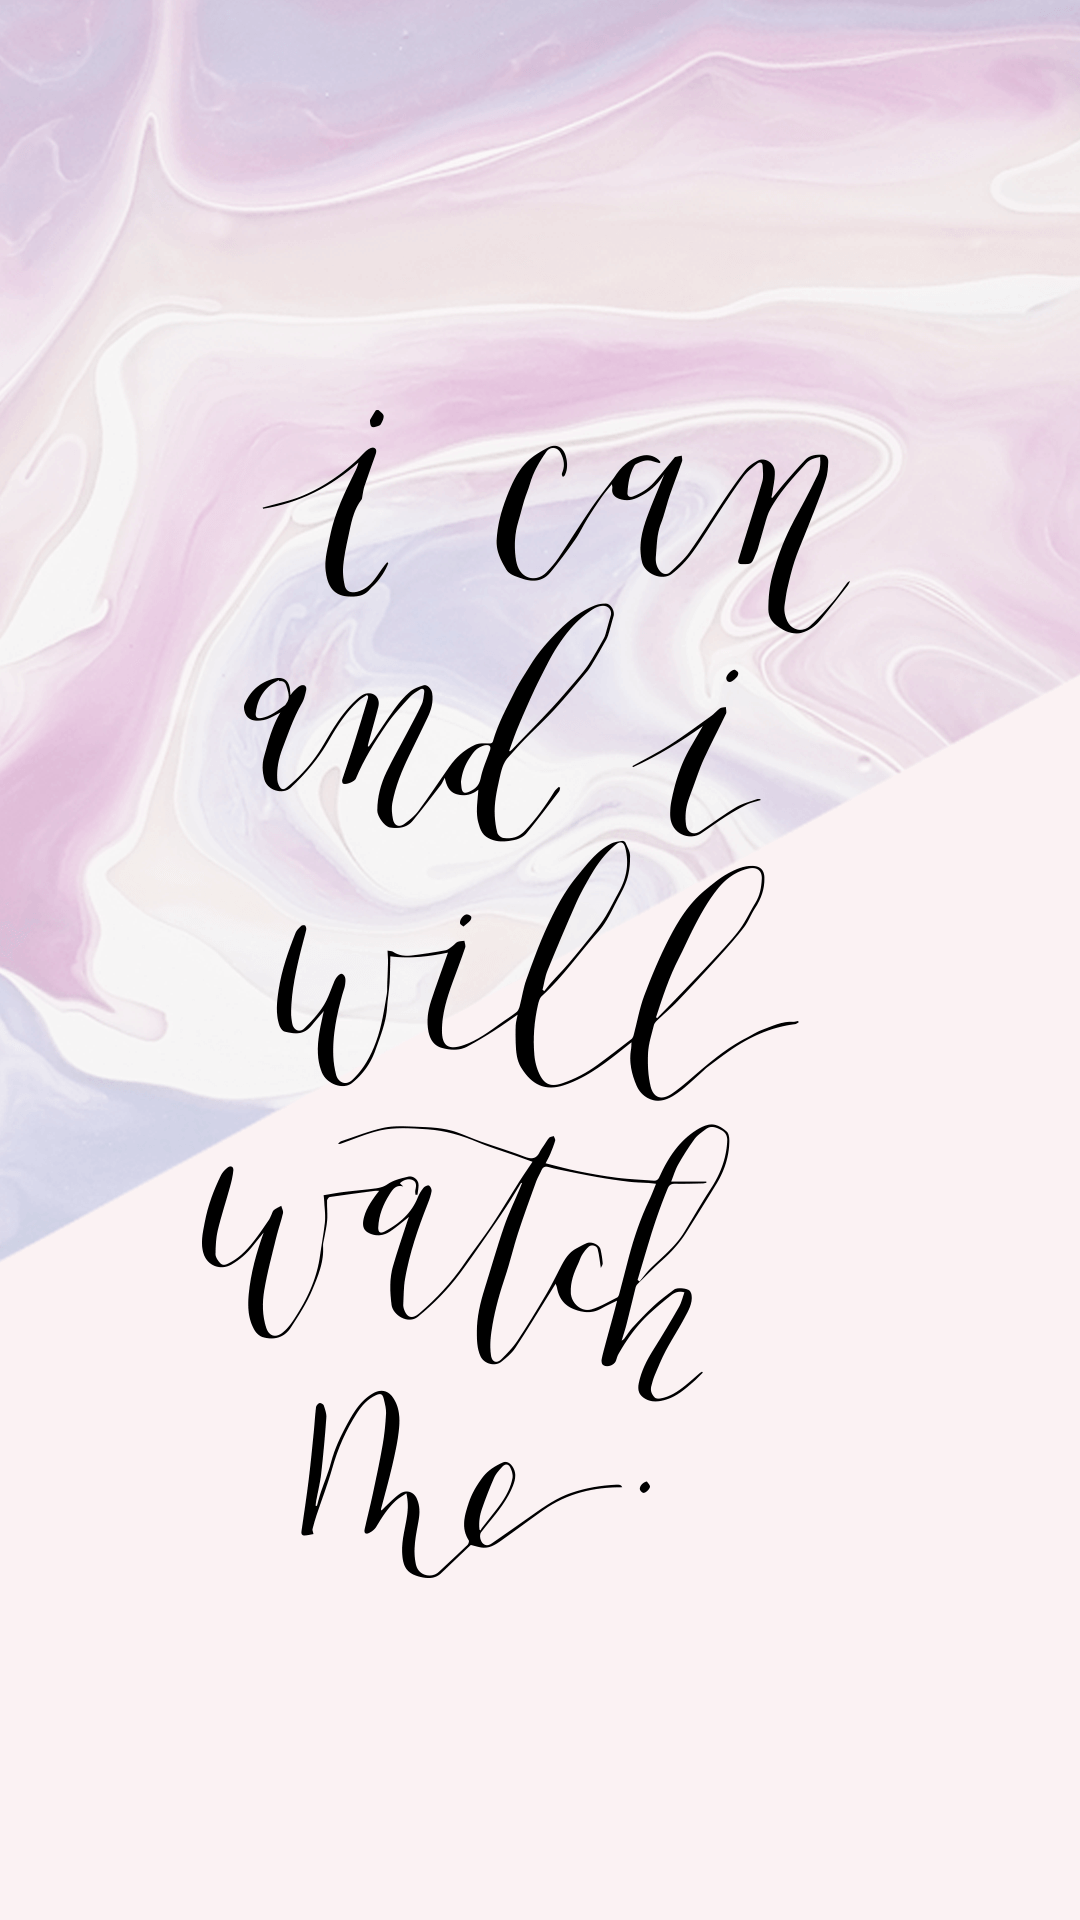 Download your free wallpaper, choose from four calligraphy quotes